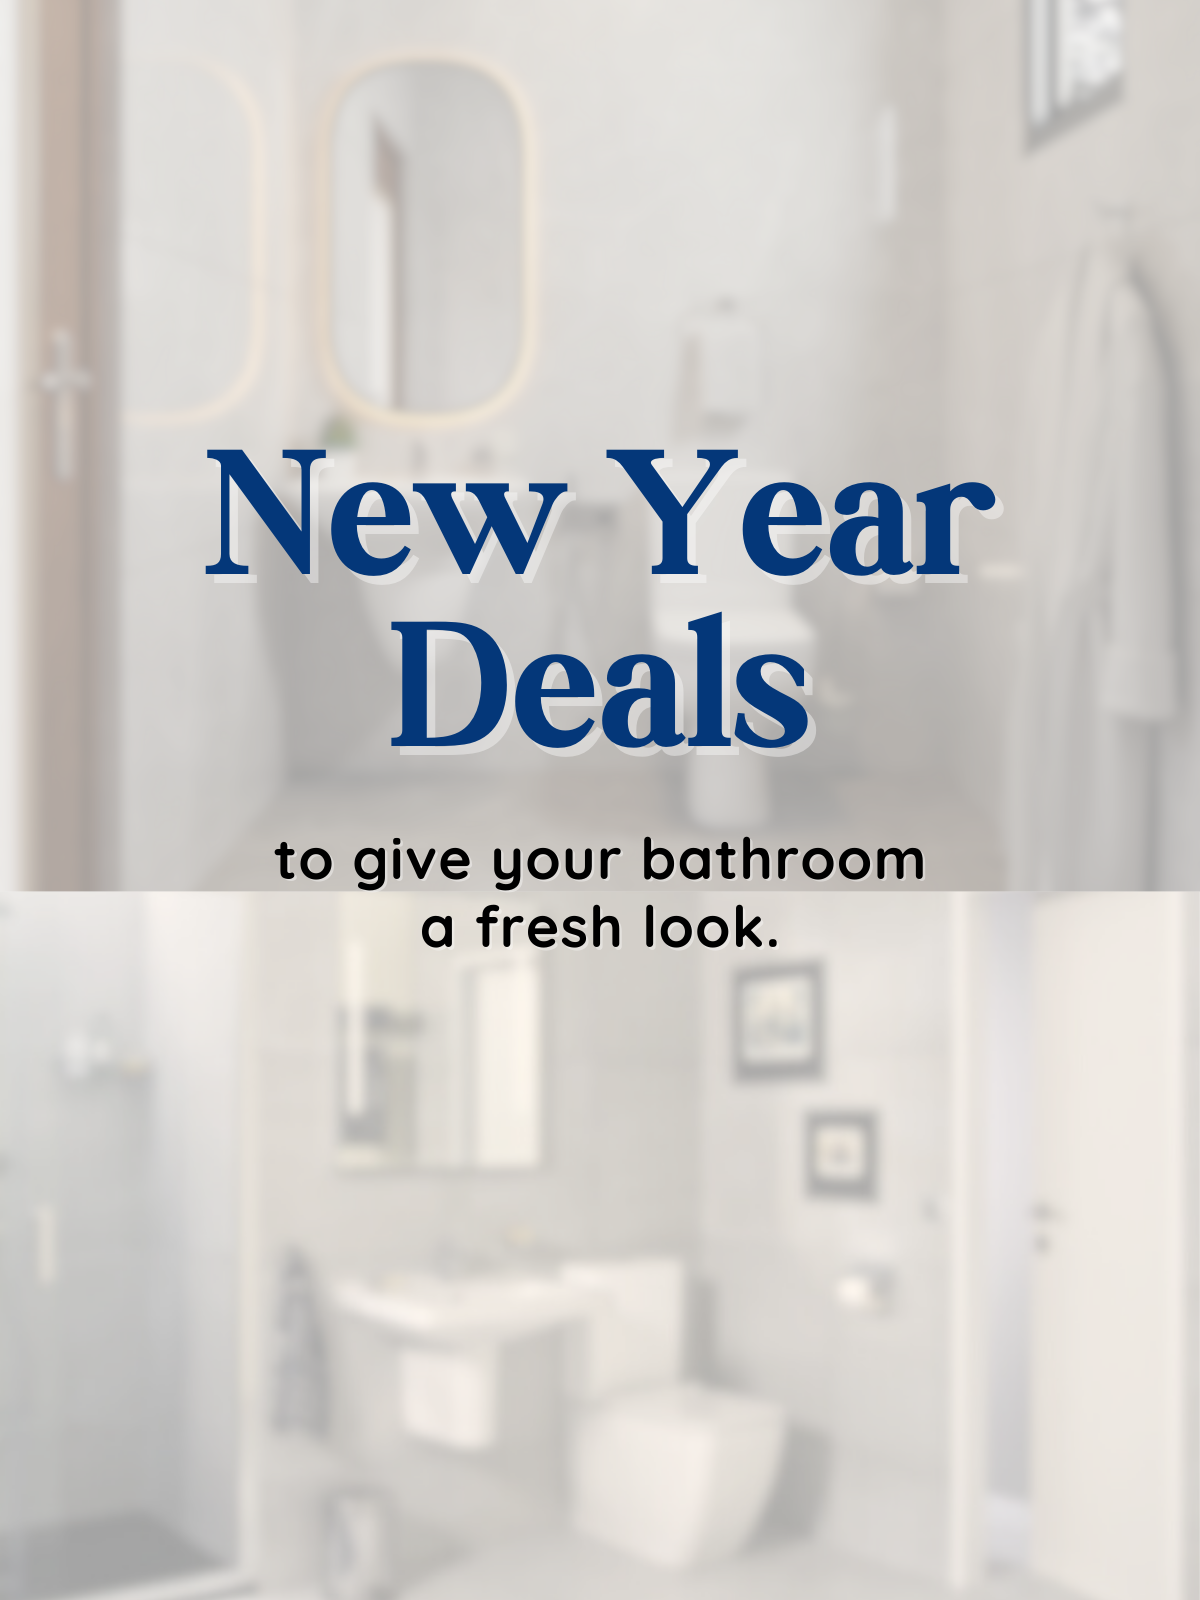 New Year Bathroom sets discount offer.